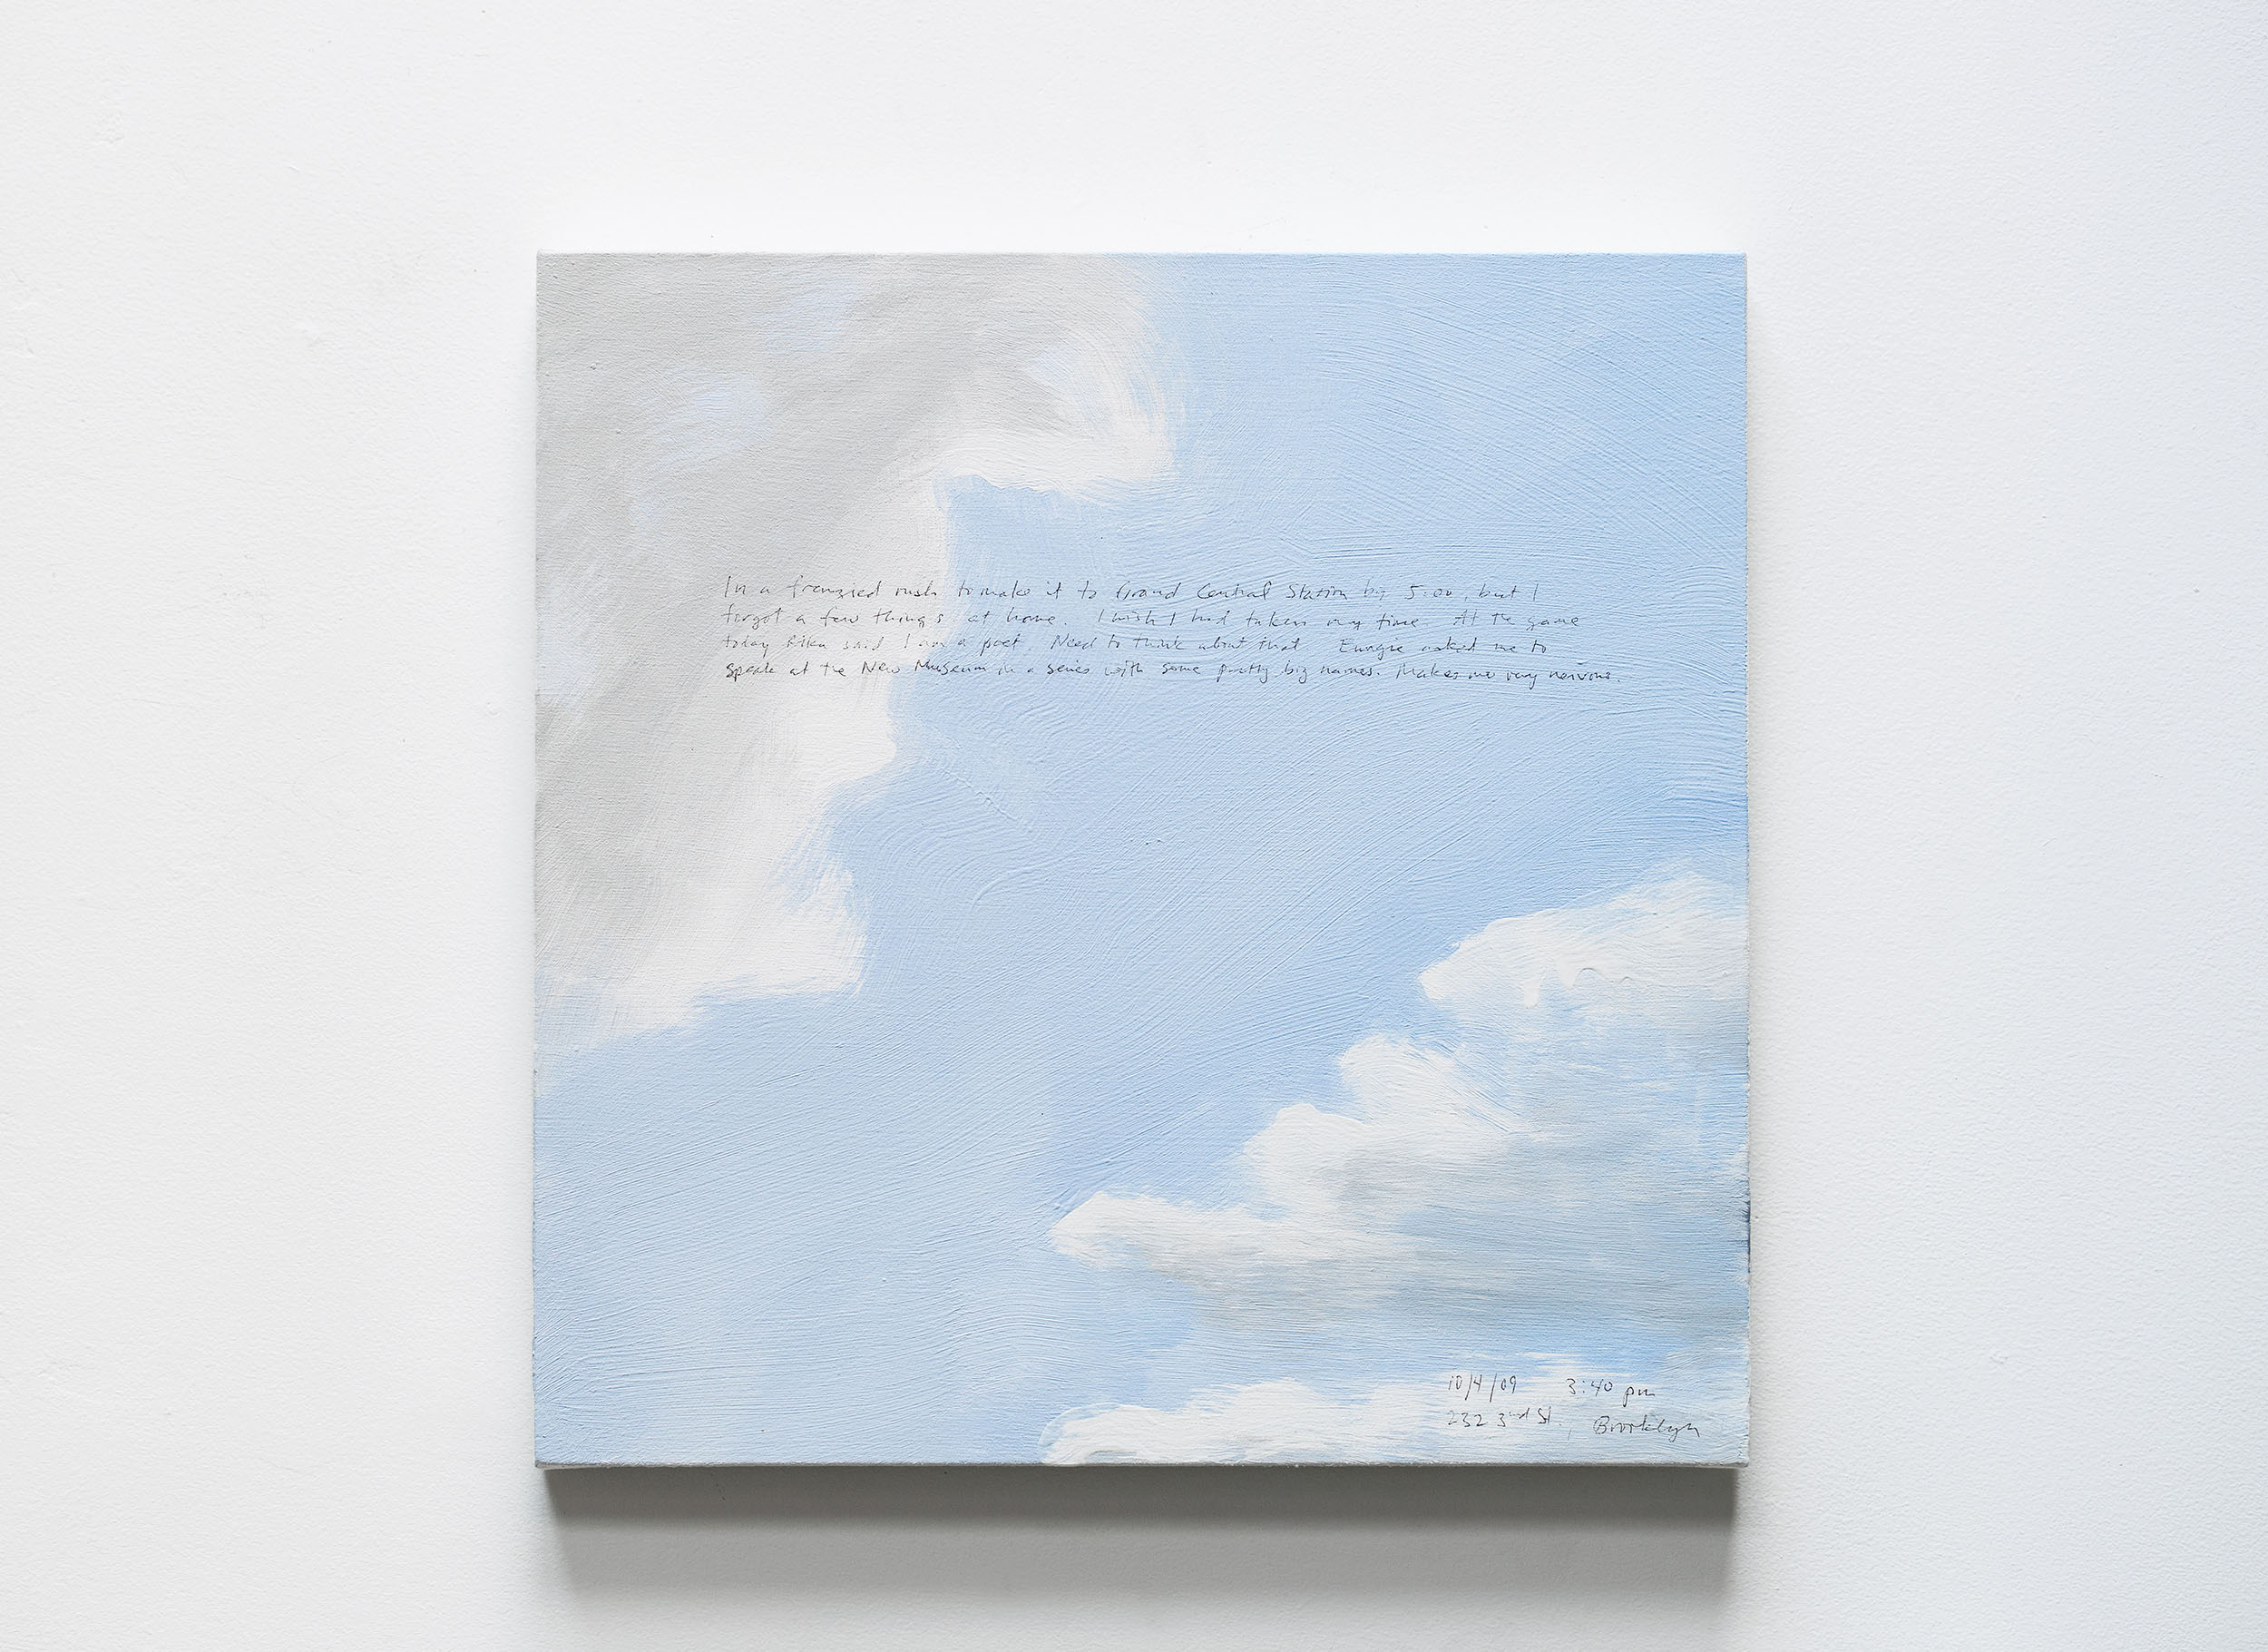 A 14 × 14 inch, acrylic painting of the sky. A journal entry is handwritten on the painting:

“In a frenzied rush to make it to Grand Central Station by 5:00, but I forgot a few things at home. I wish I had taken my time. At the game today Rika said I am a poet. Need to think about that. Eungie asked me to speak at the New Museum in a series with some pretty big names. Makes me very nervous.

10/4/09 3:40 pm
232 3rd St., Brooklyn”